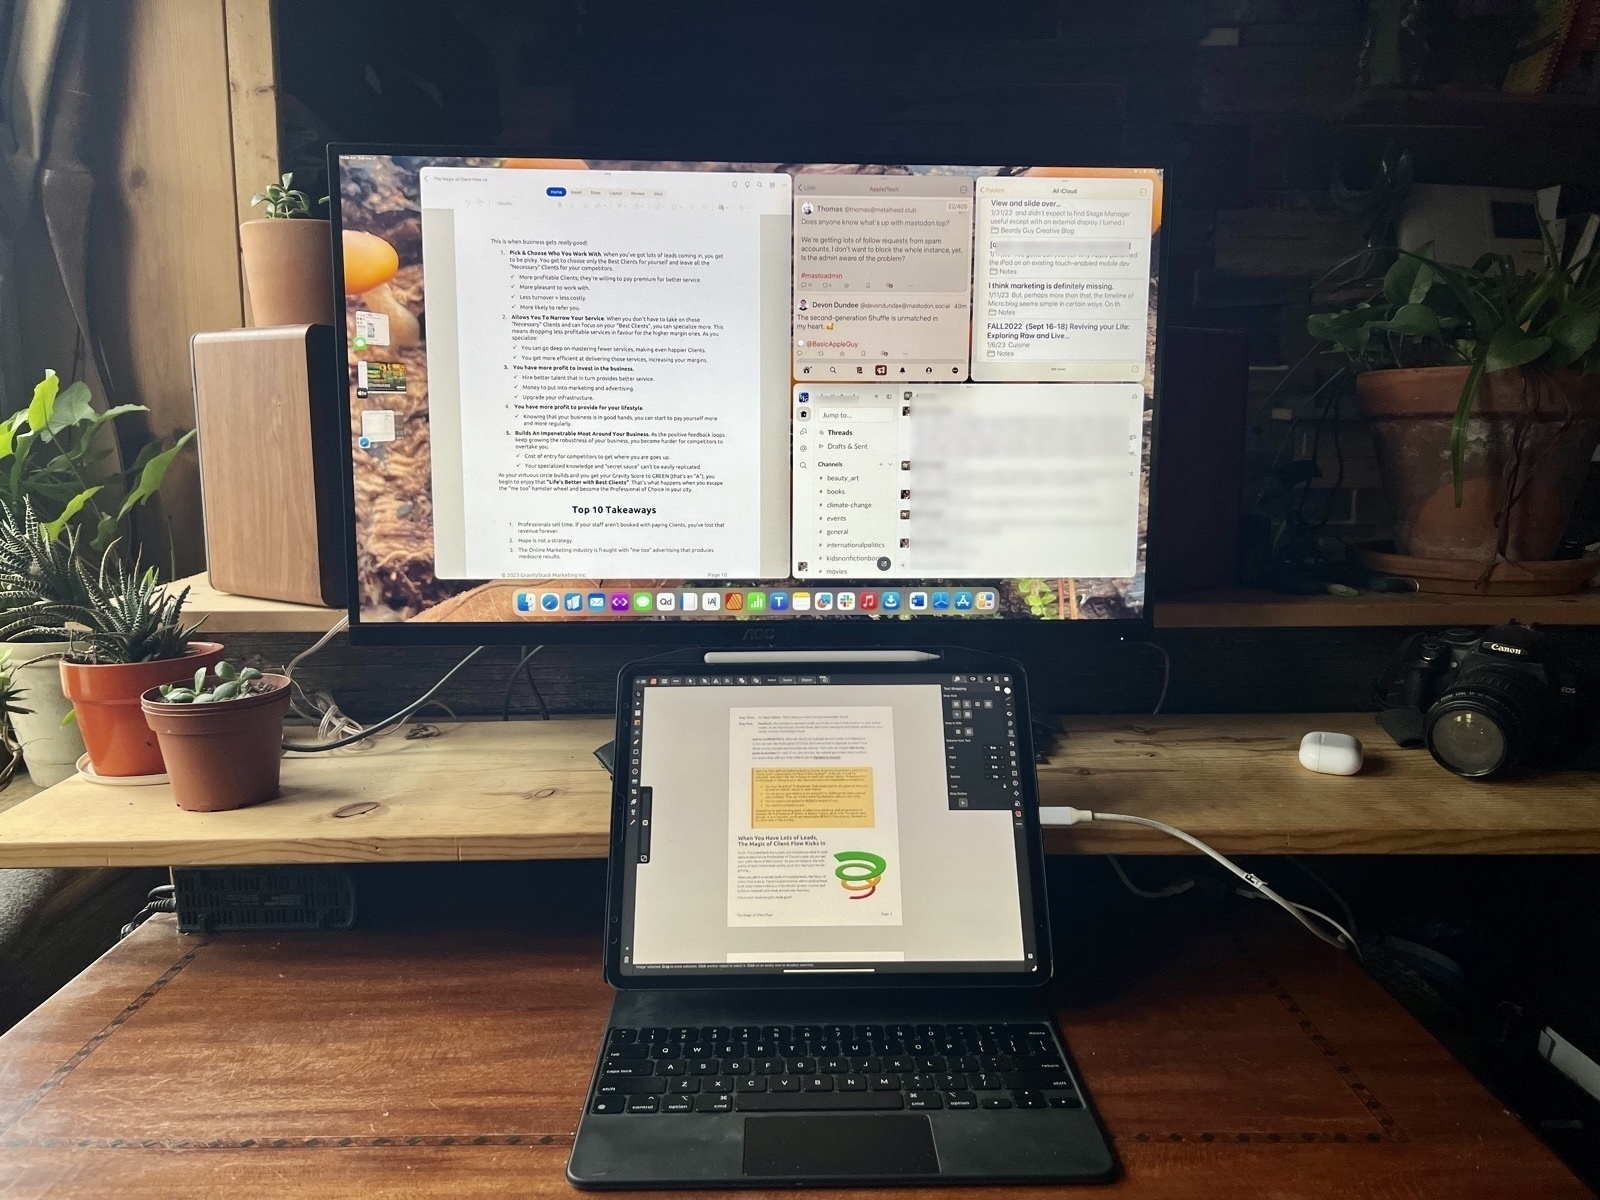 An iPad is connected to an external display. The app LumaFusion is full screen on the display.